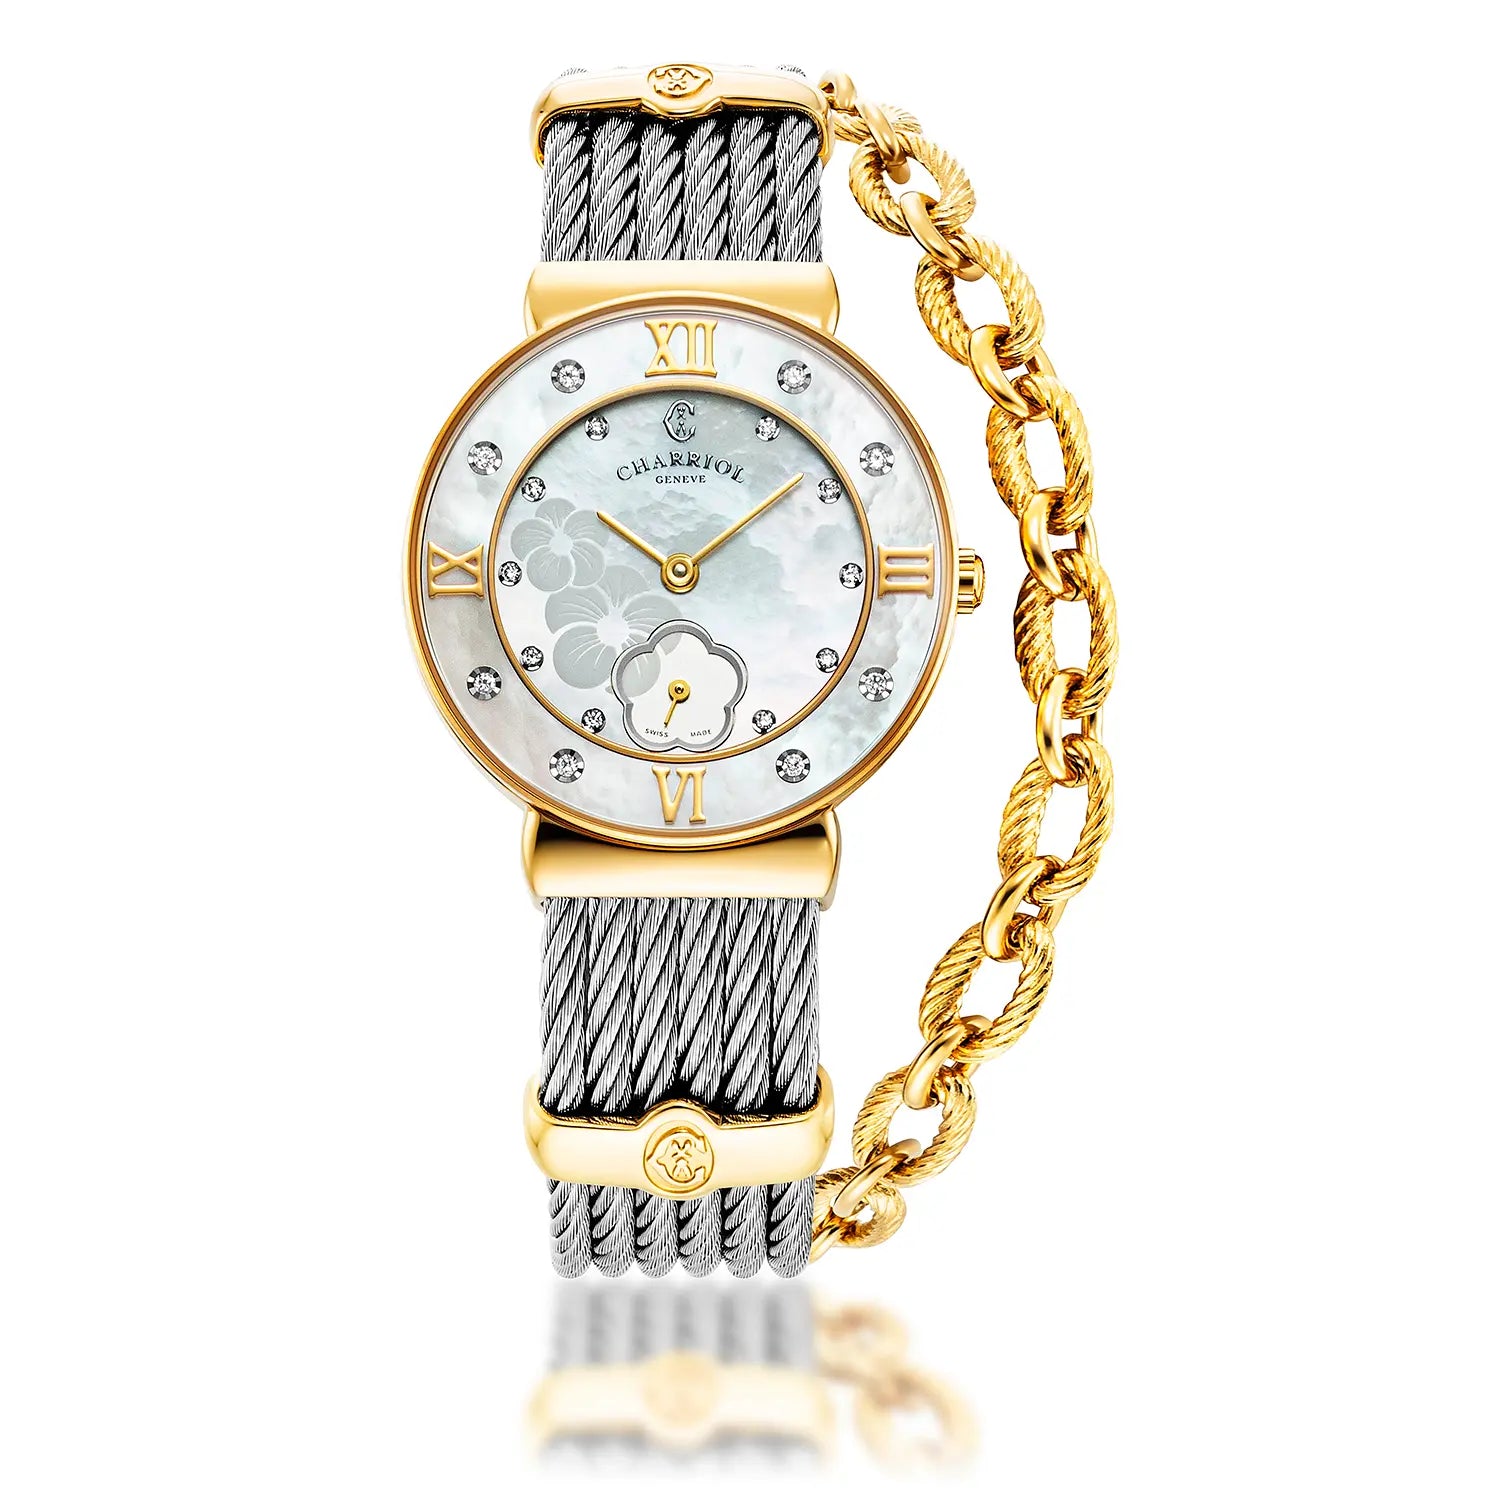 ST TROPEZ ICON, 30MM, QUARTZ CALIBRE, MOTHER-OF-PEARL HIBISCUS DIAL, MOTHER-OF-PEARL WITH 8 DIAMONDS BEZEL, STEEL CABLE BRACELET - Charriol Geneve -  Watch